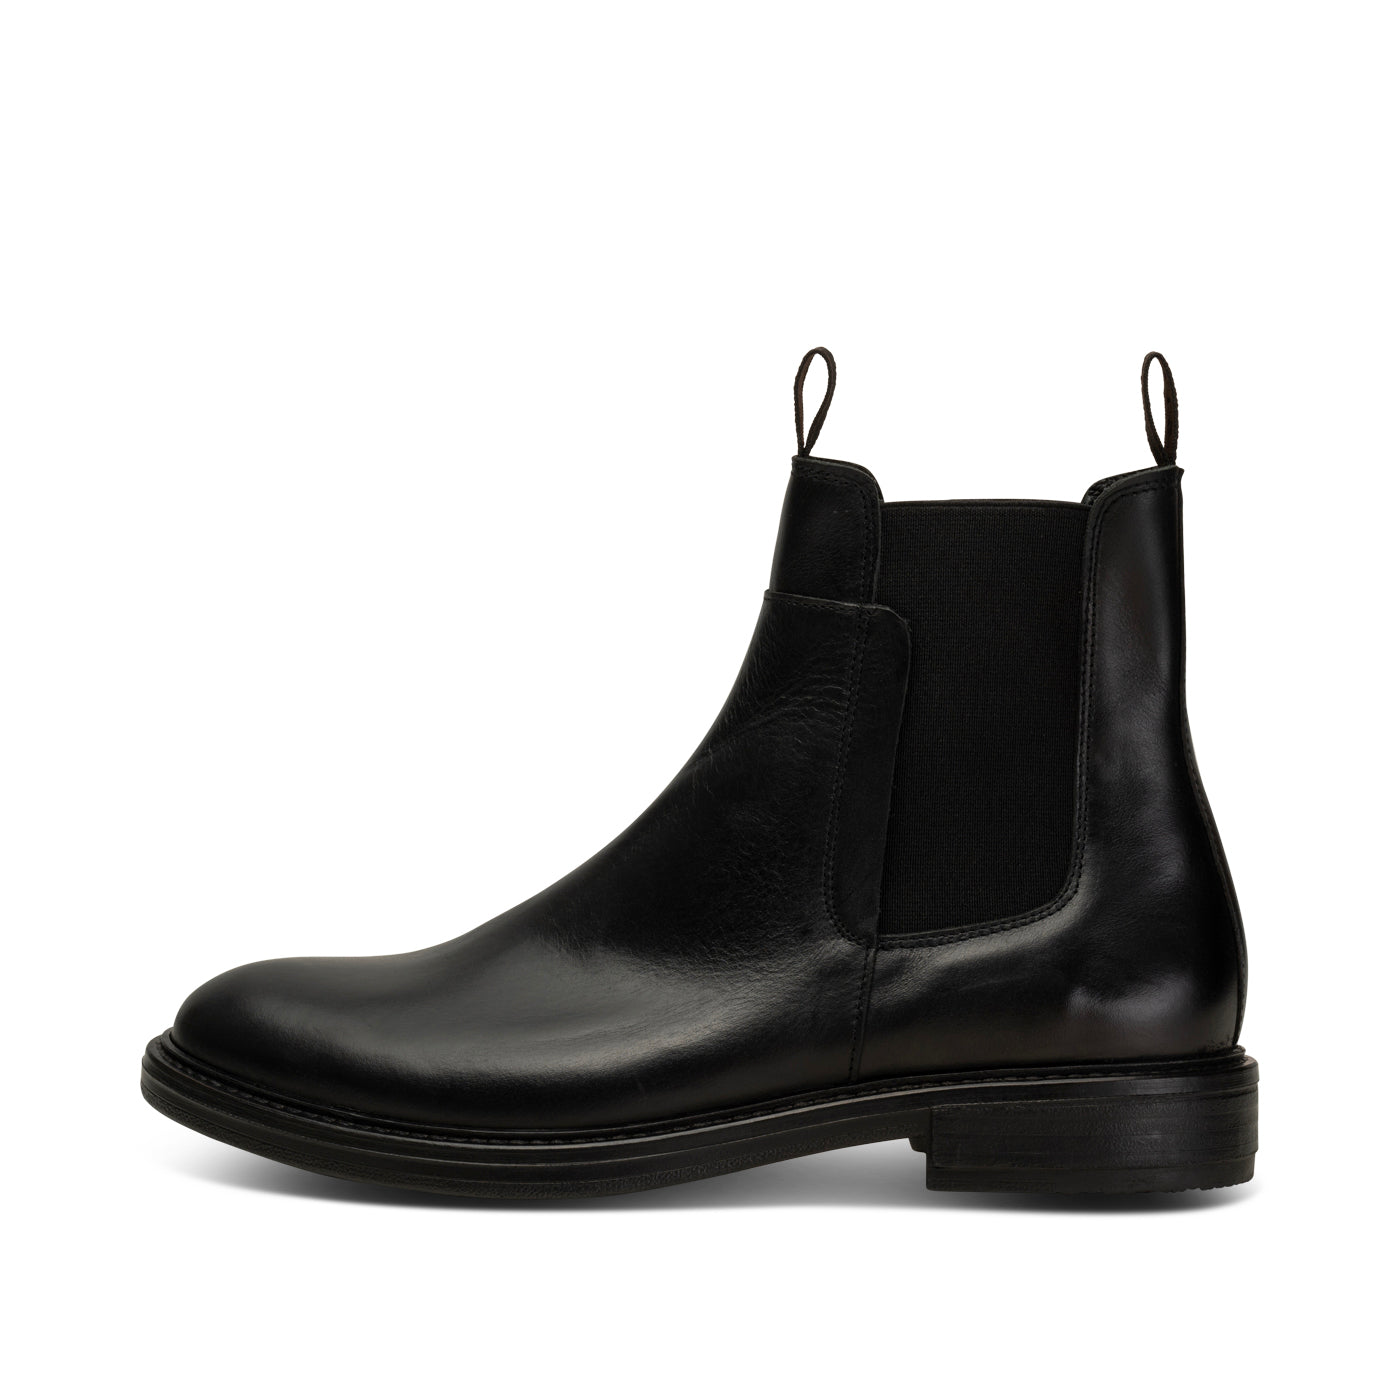 Stanley Chelseaboot Leather - BLACK – SHOE THE BEAR - COM